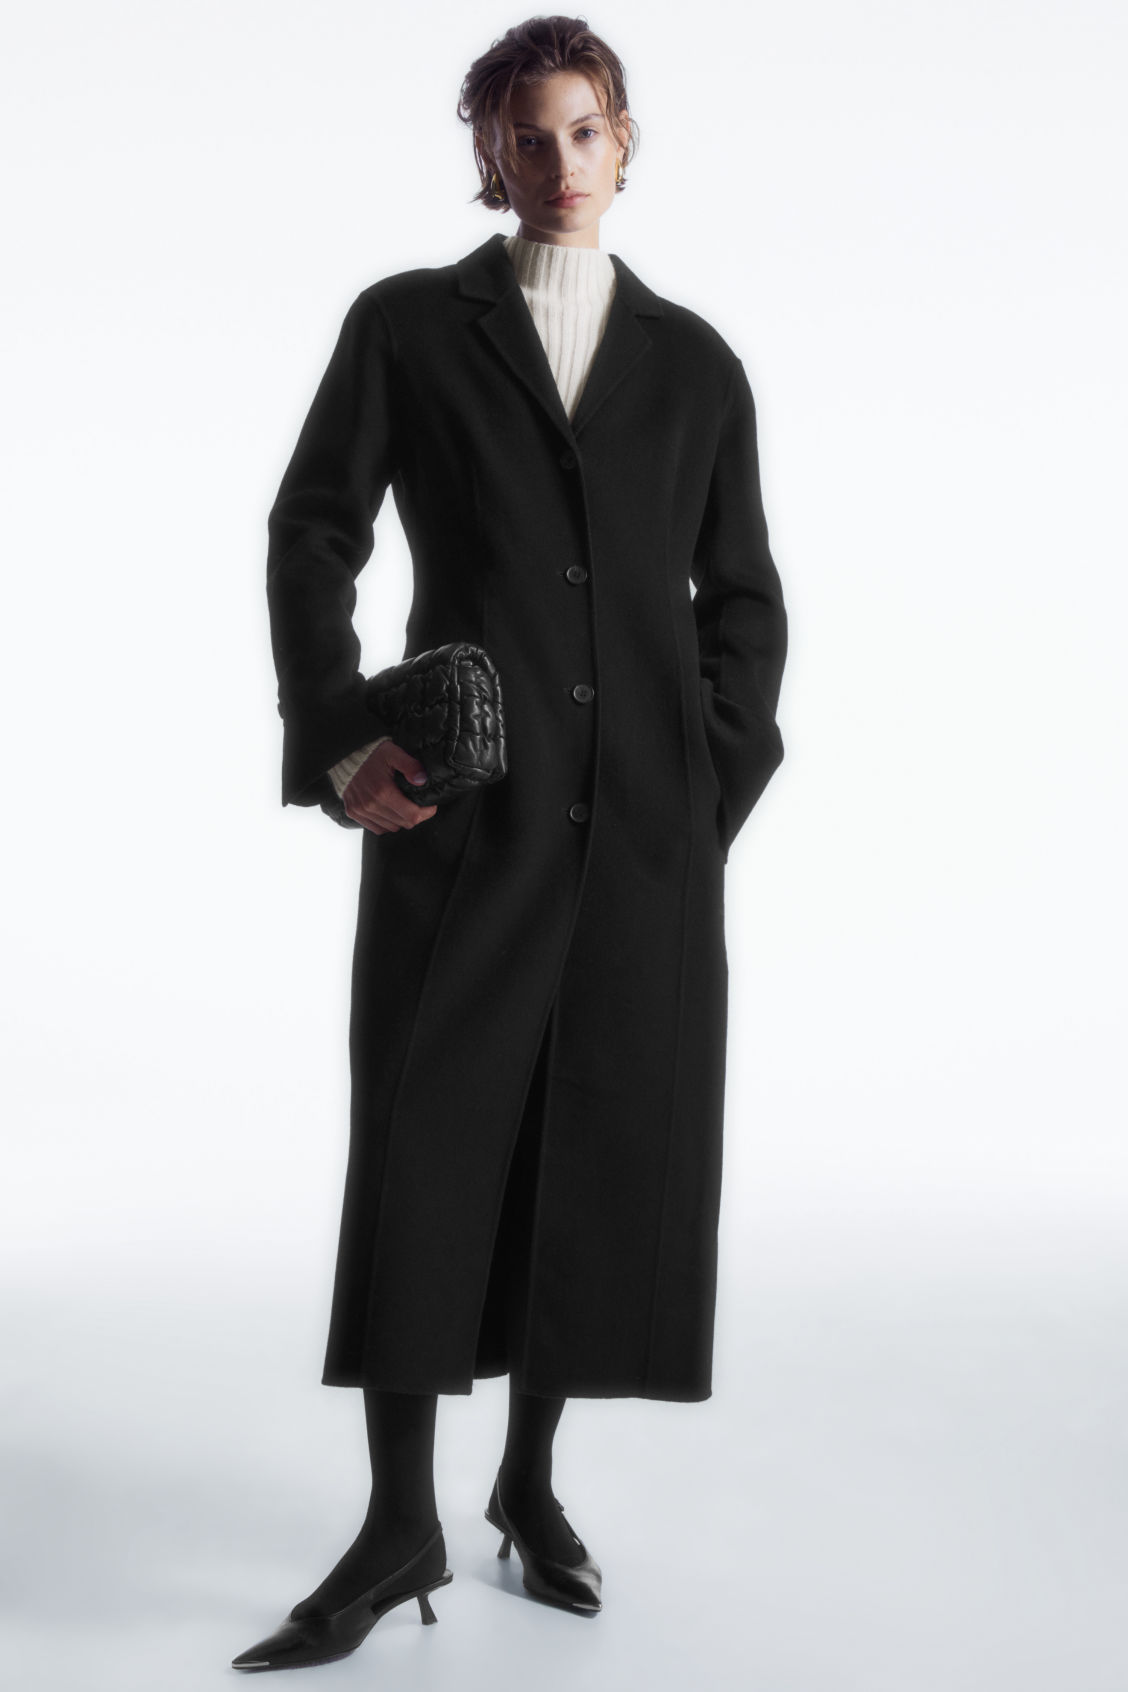 TAILORED DOUBLE-FACED WOOL COAT